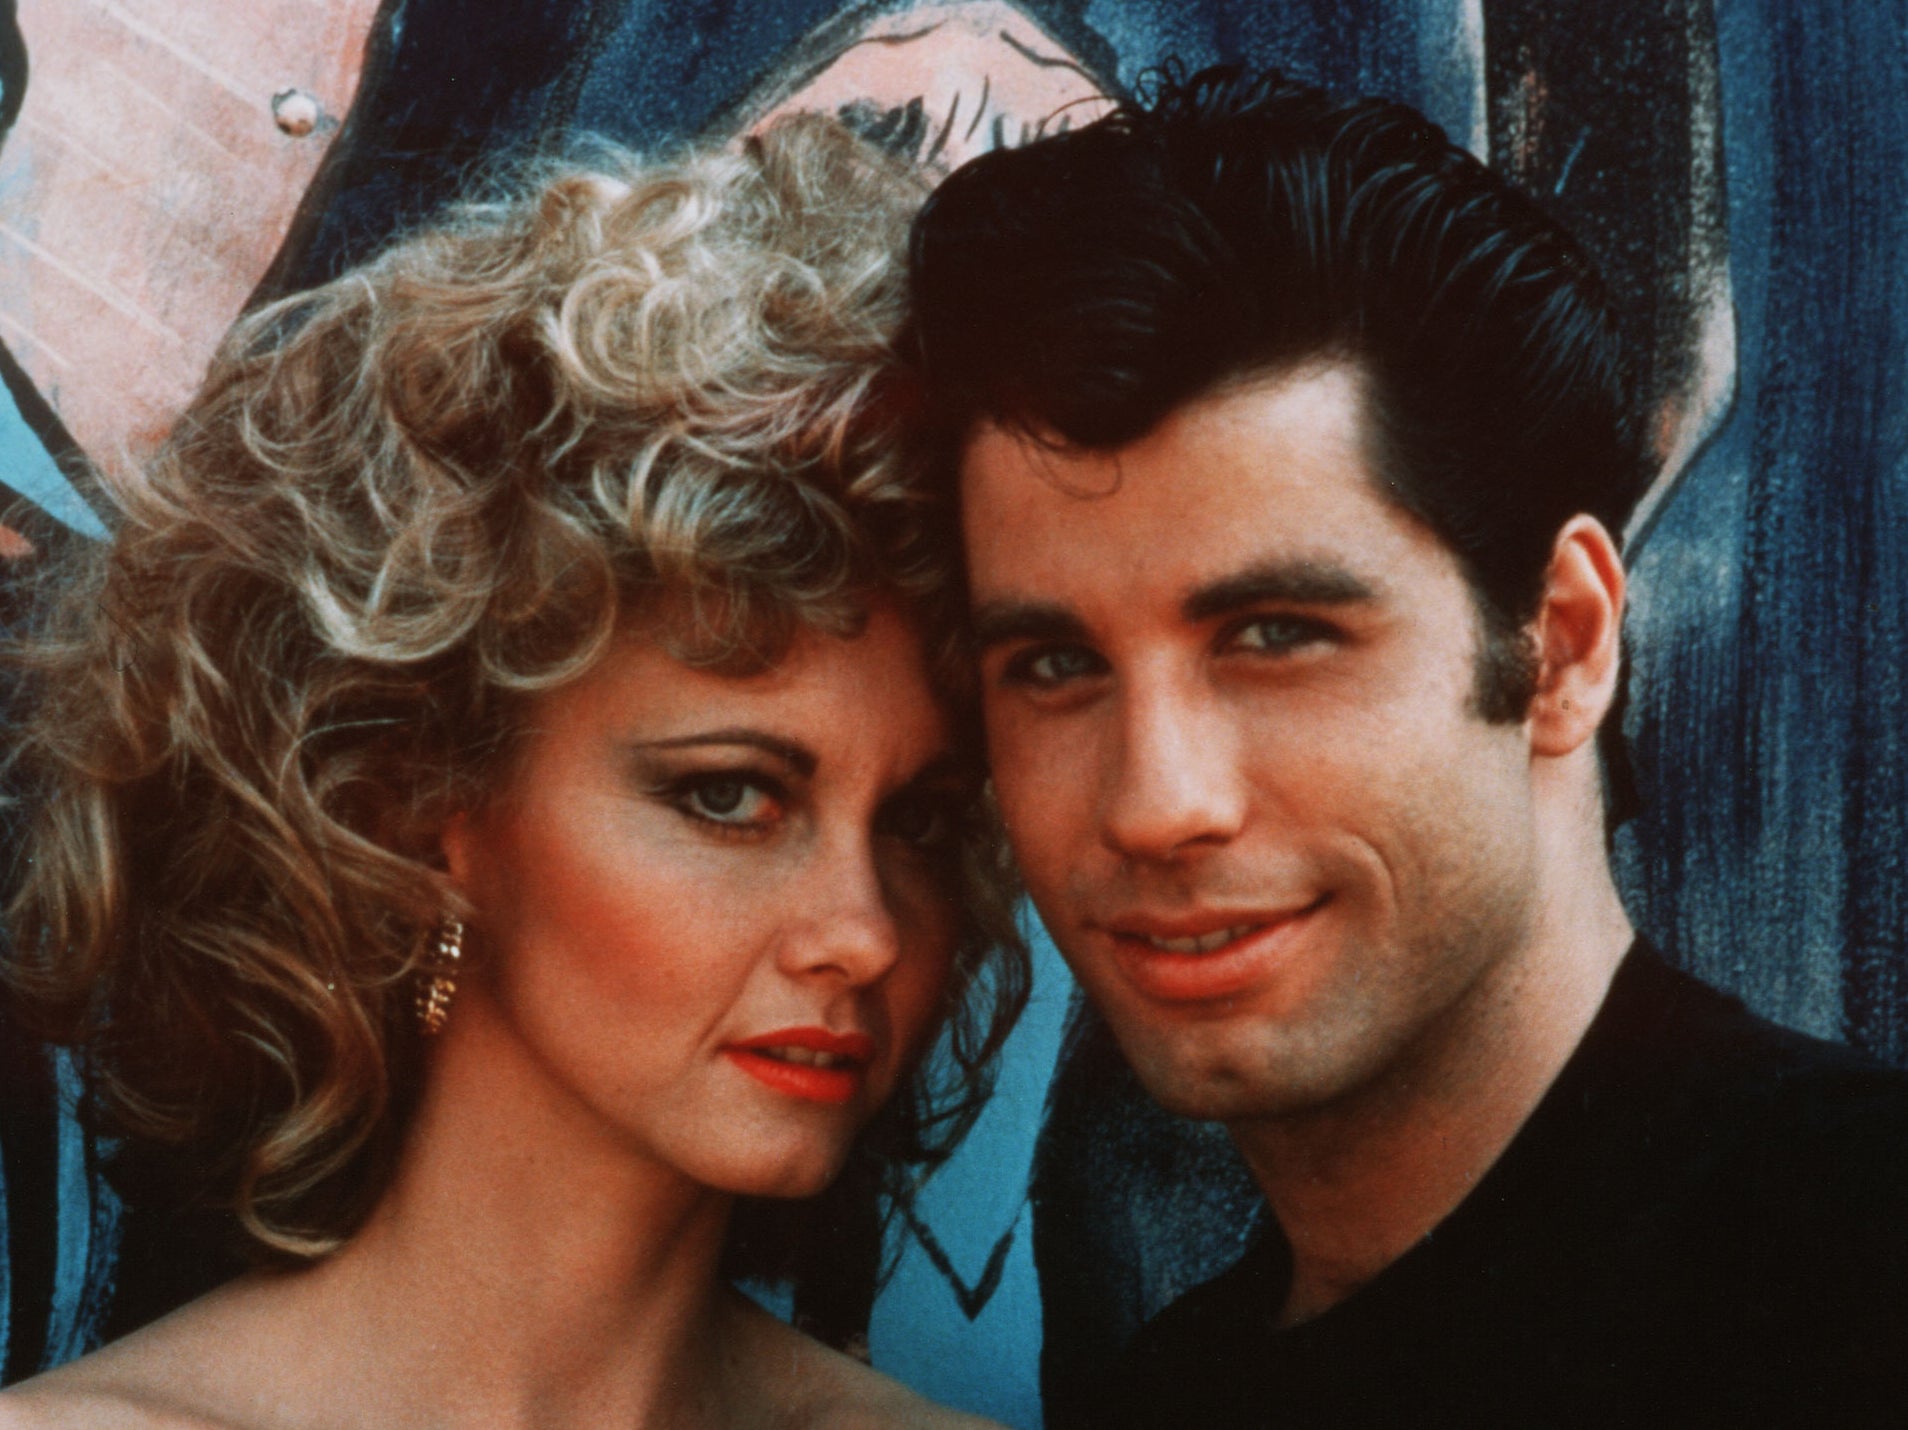 ‘Grease’ has recently been accused of sexism